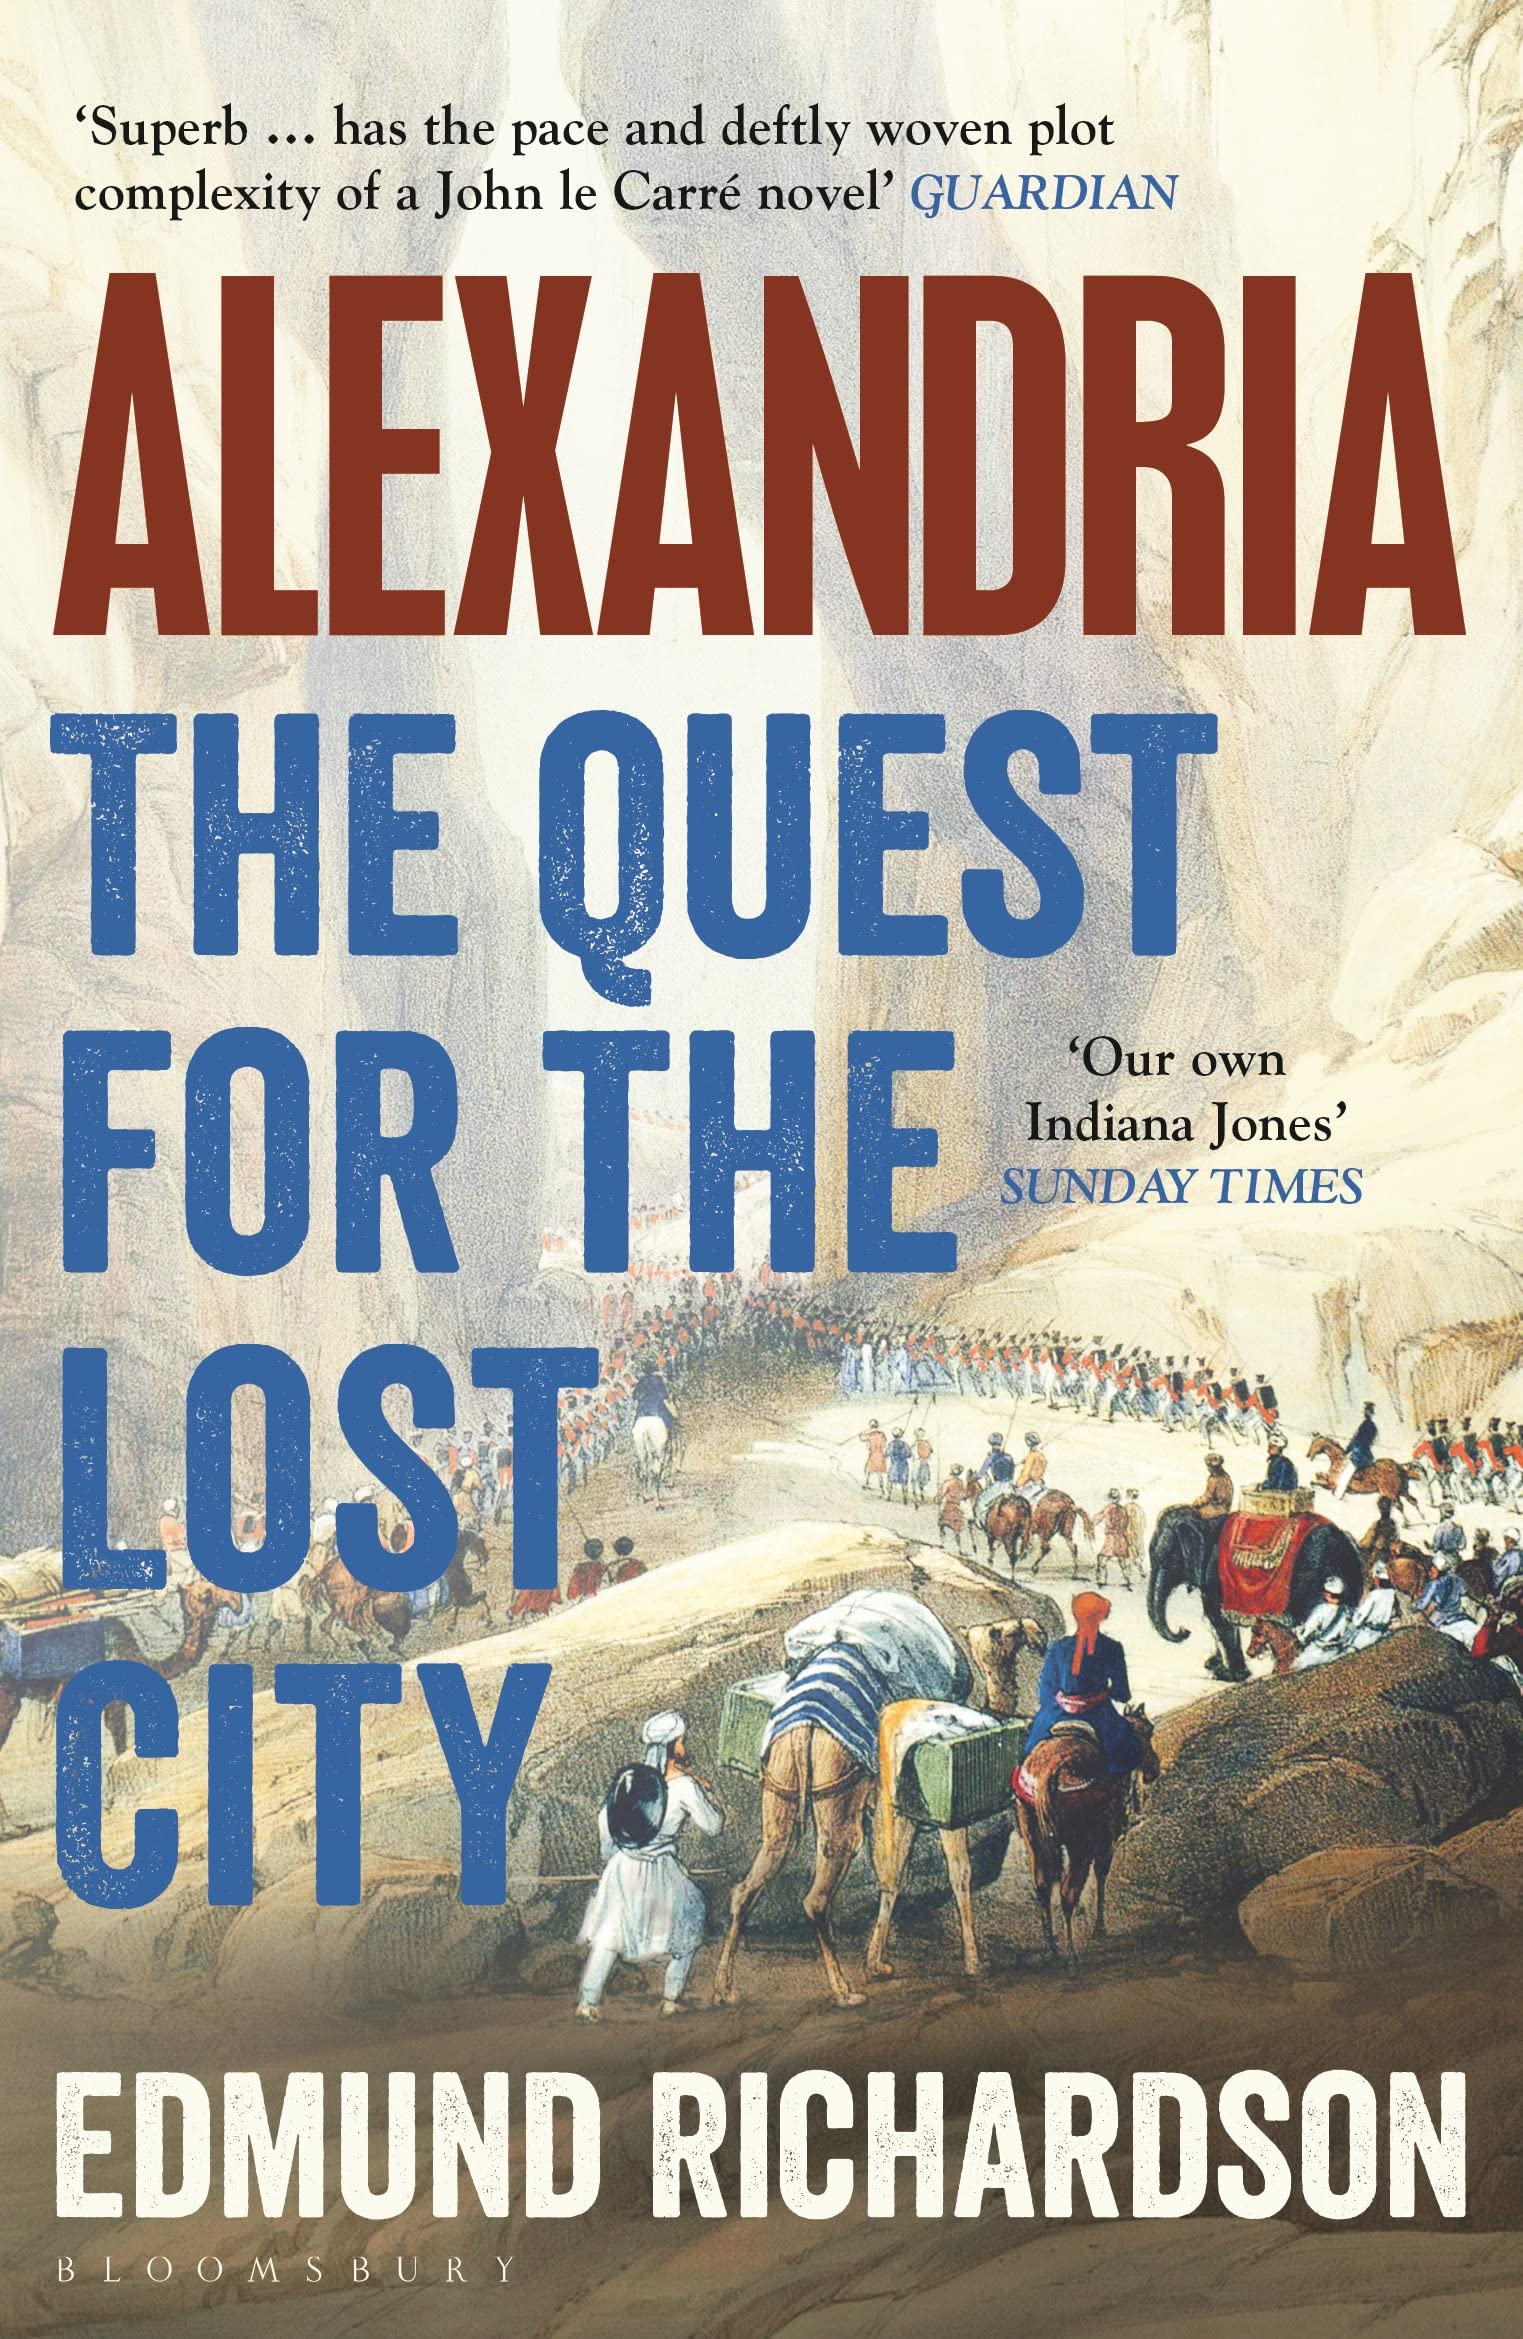 ALEXANDRIA : THE QUEST FOR THE LOST CITY